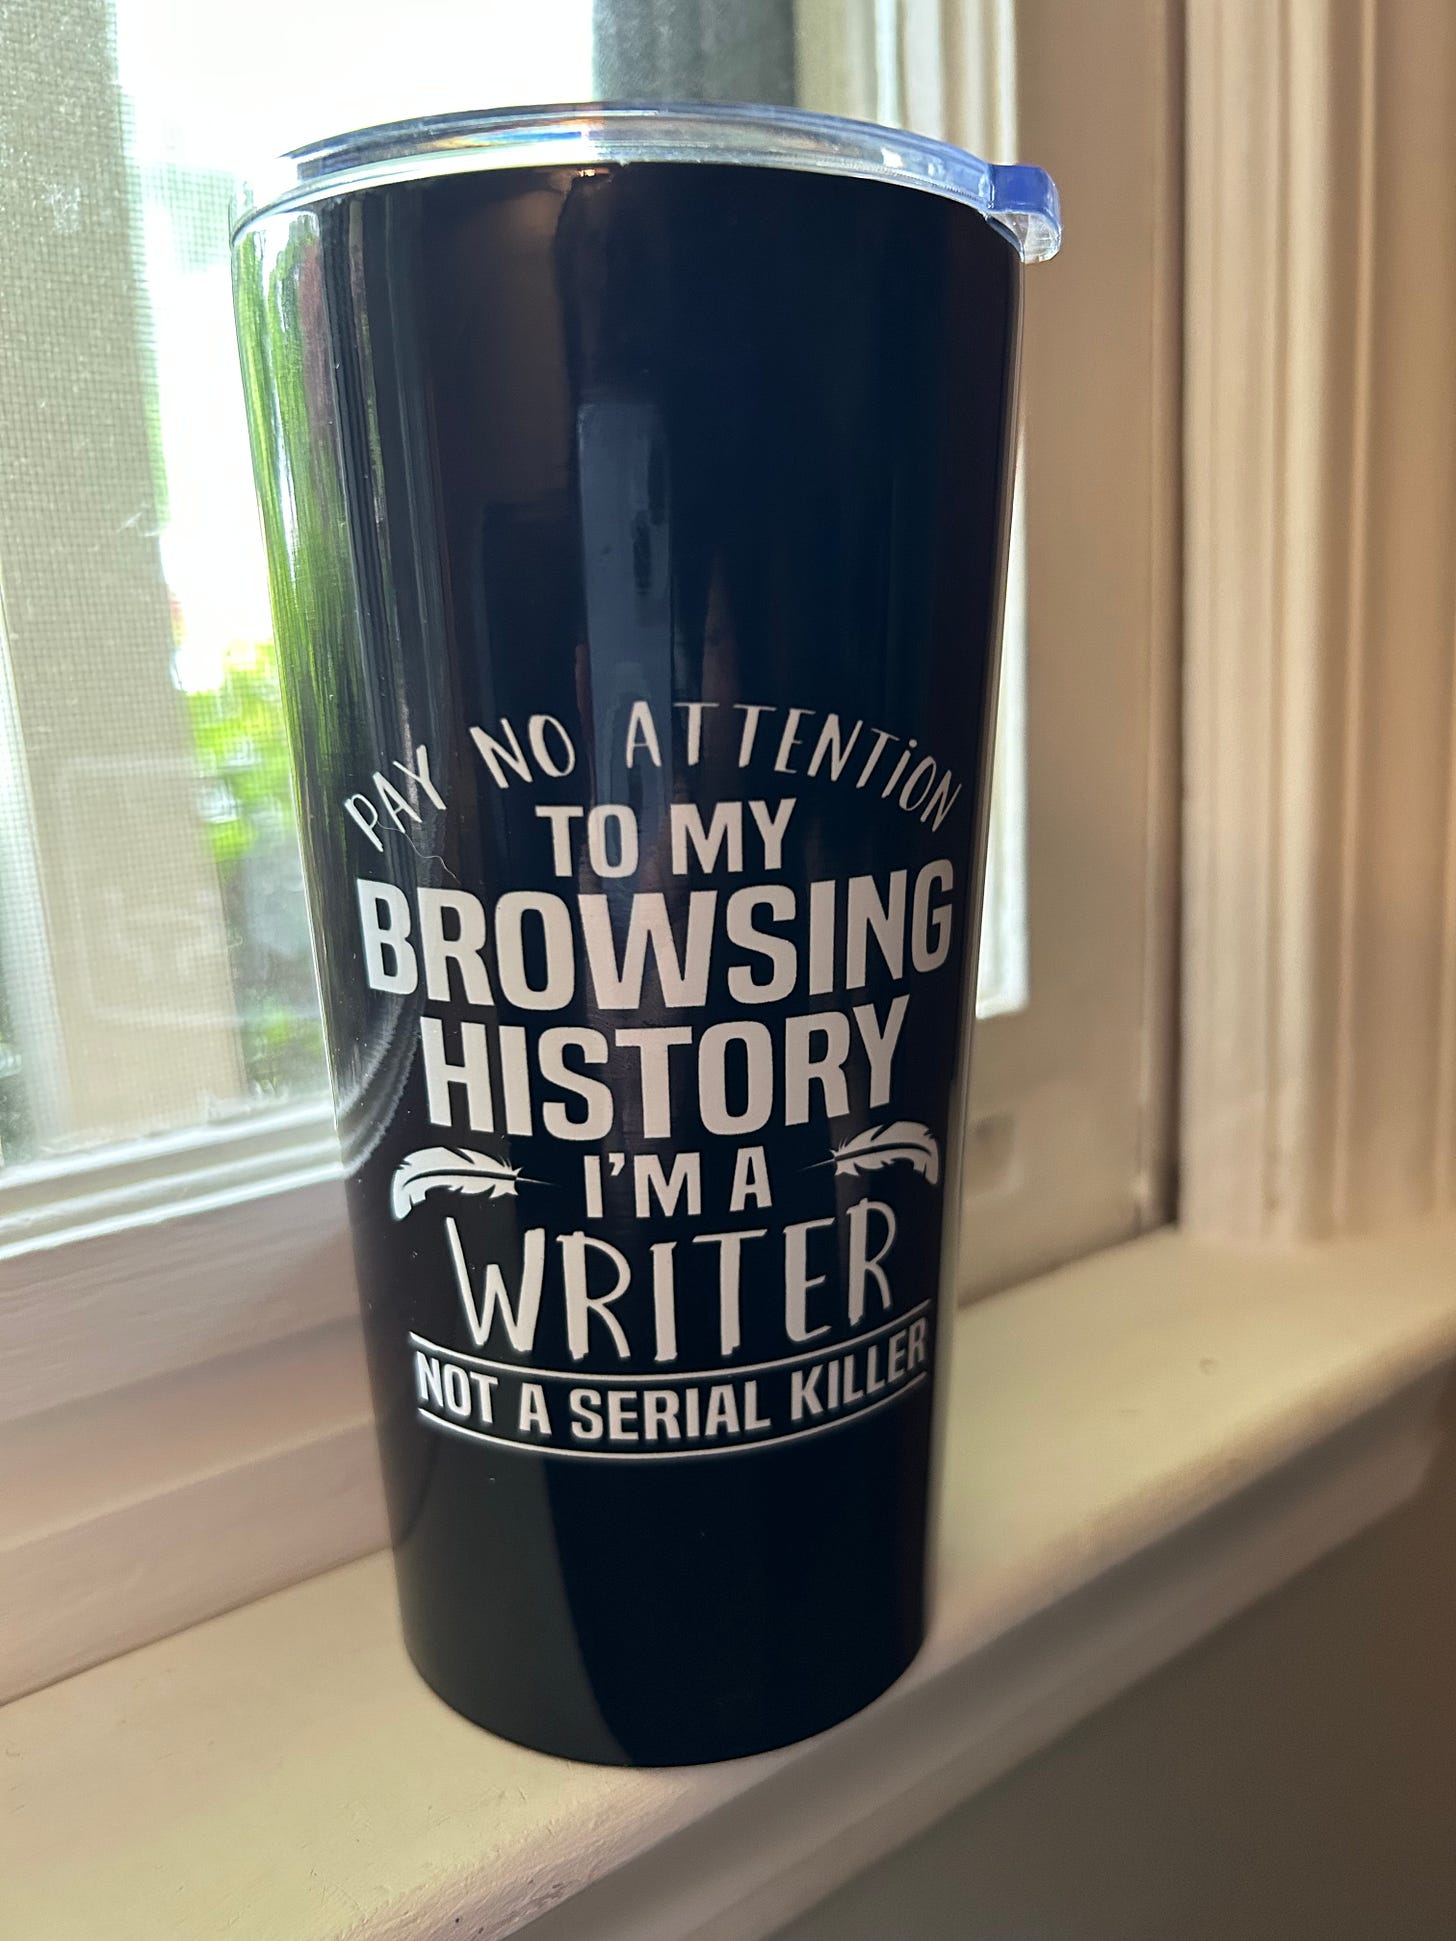 Black mug that reads "Pay no attention to my browsing history, I'm a writer not a serial killer" in white lettering